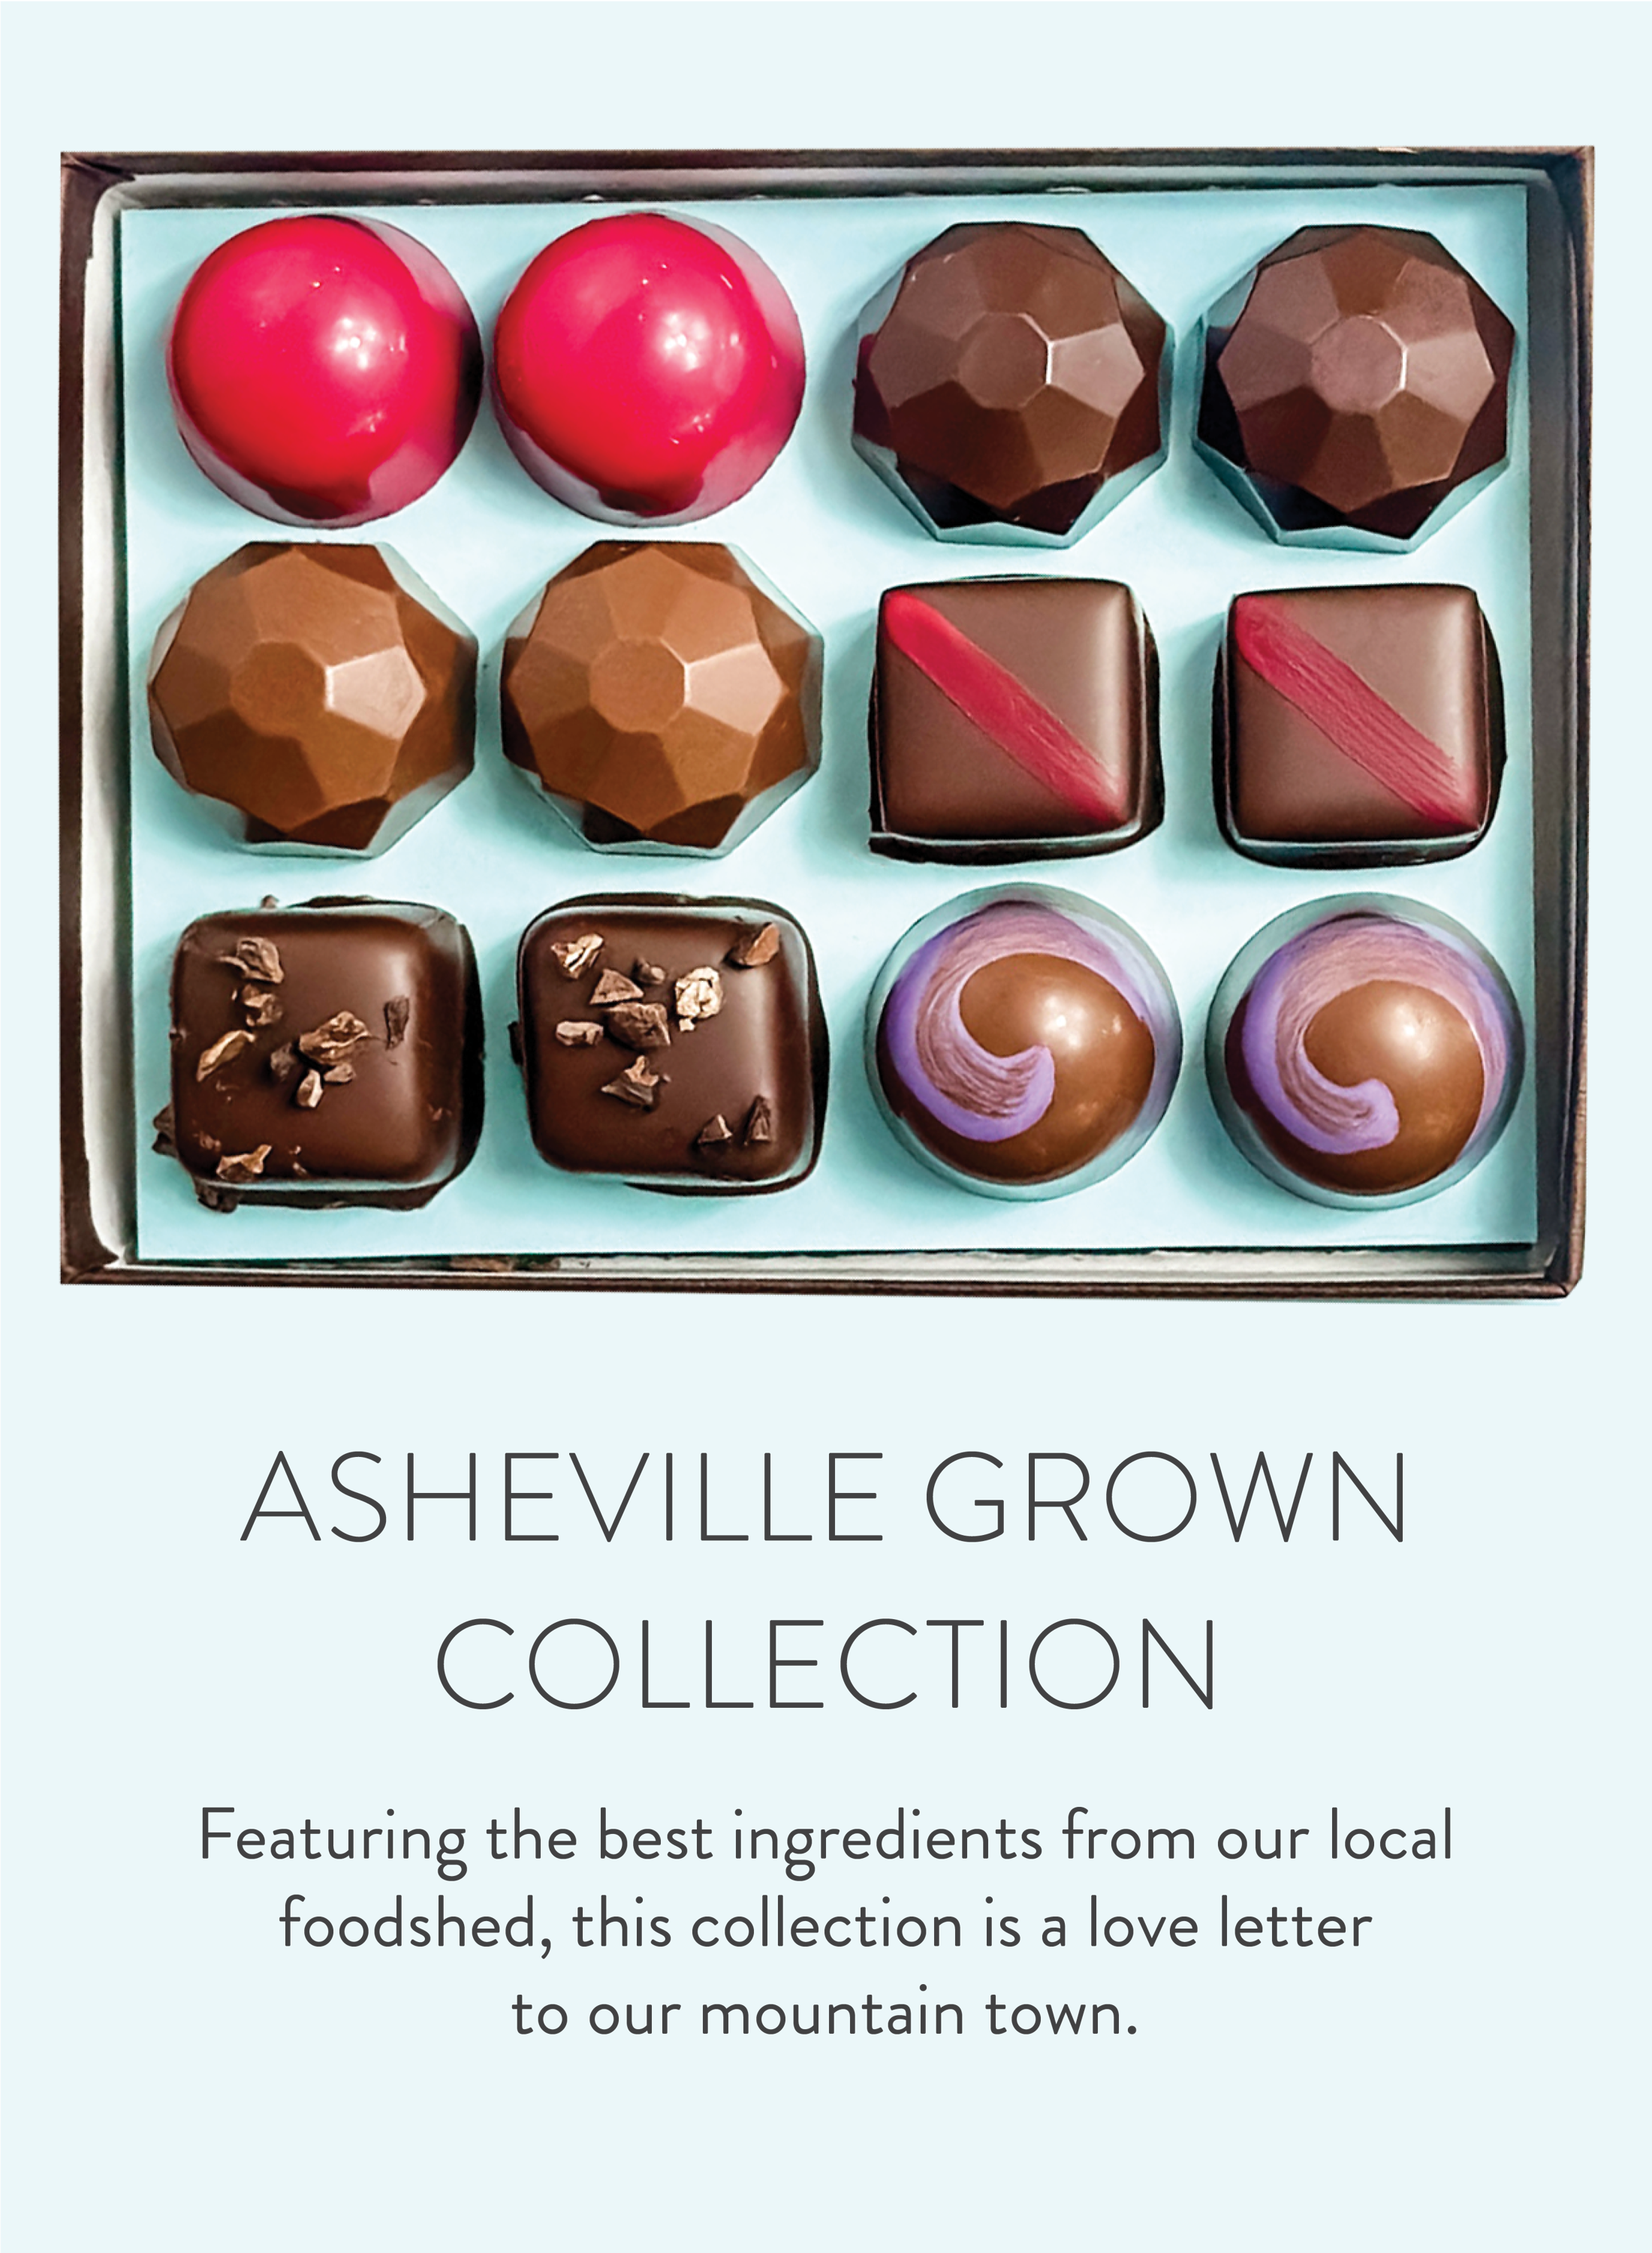 Asheville Grown Collection product page